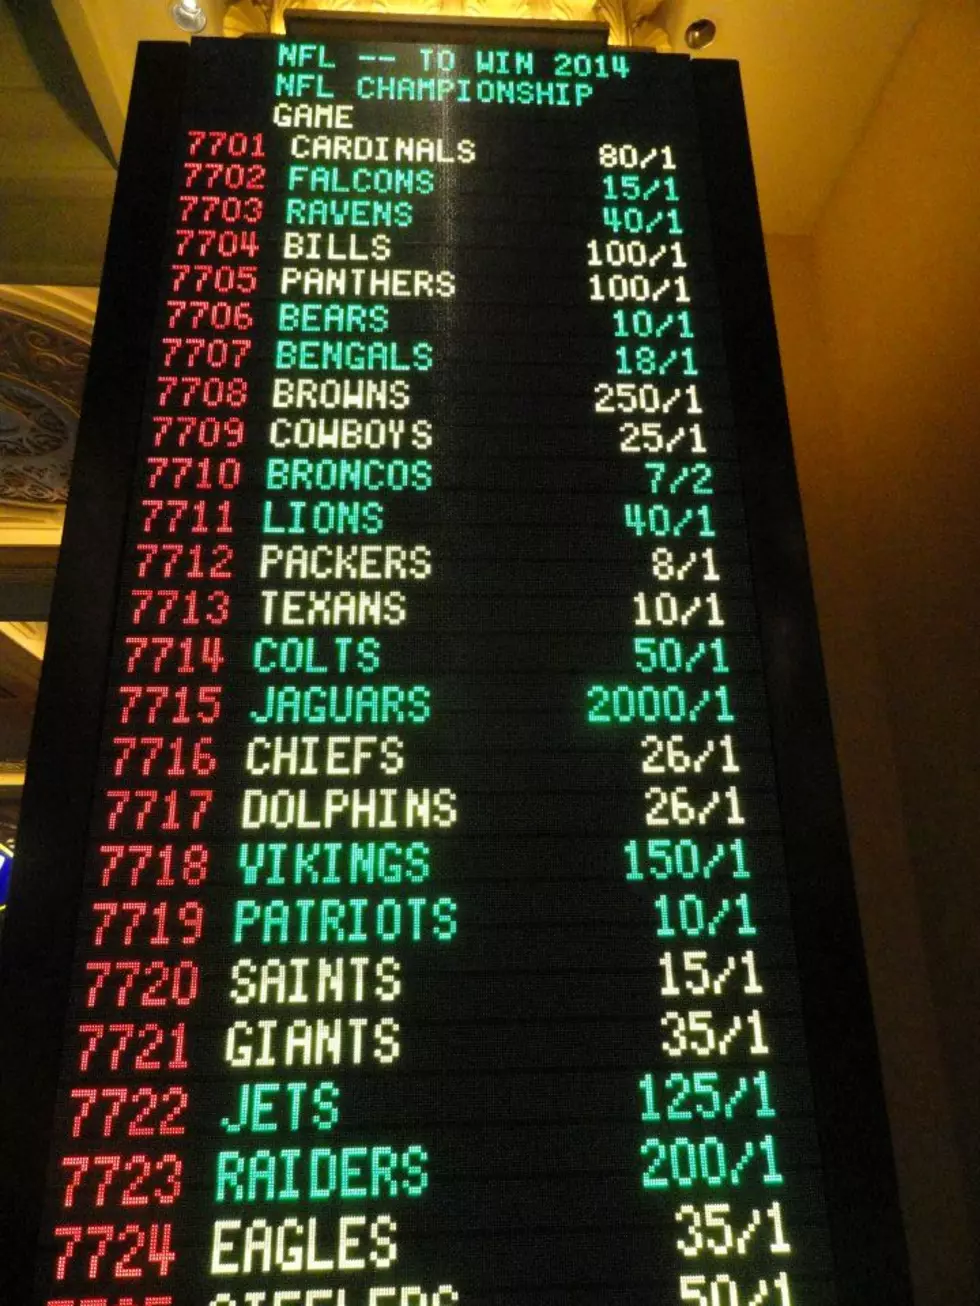 If You Like To Gamble, You Can Bet On Just About Anything Super Bowl Related